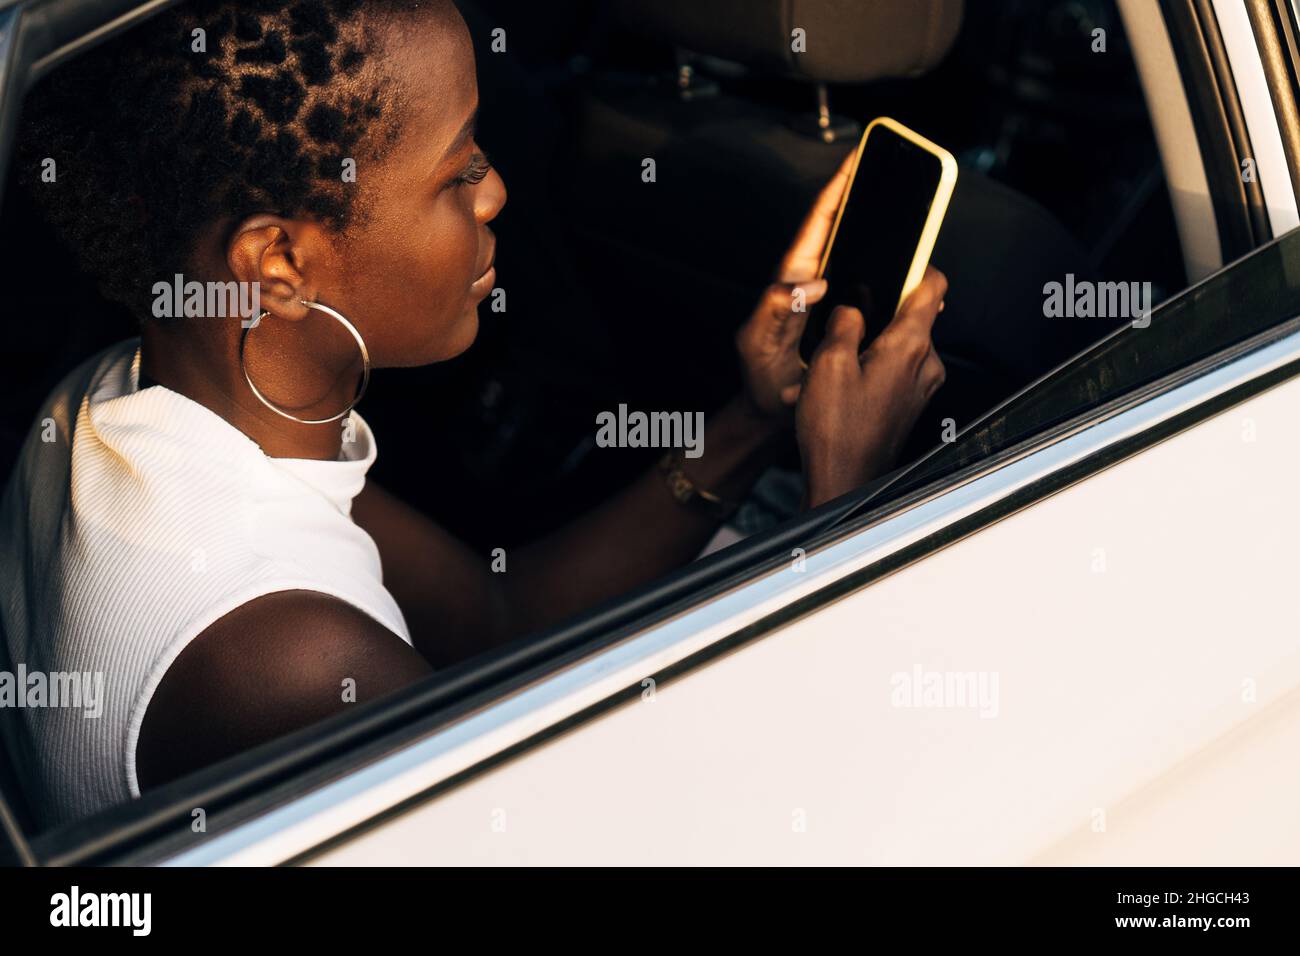 Woman using a mobile phone while traveling in the back seat of a car. Stock Photo